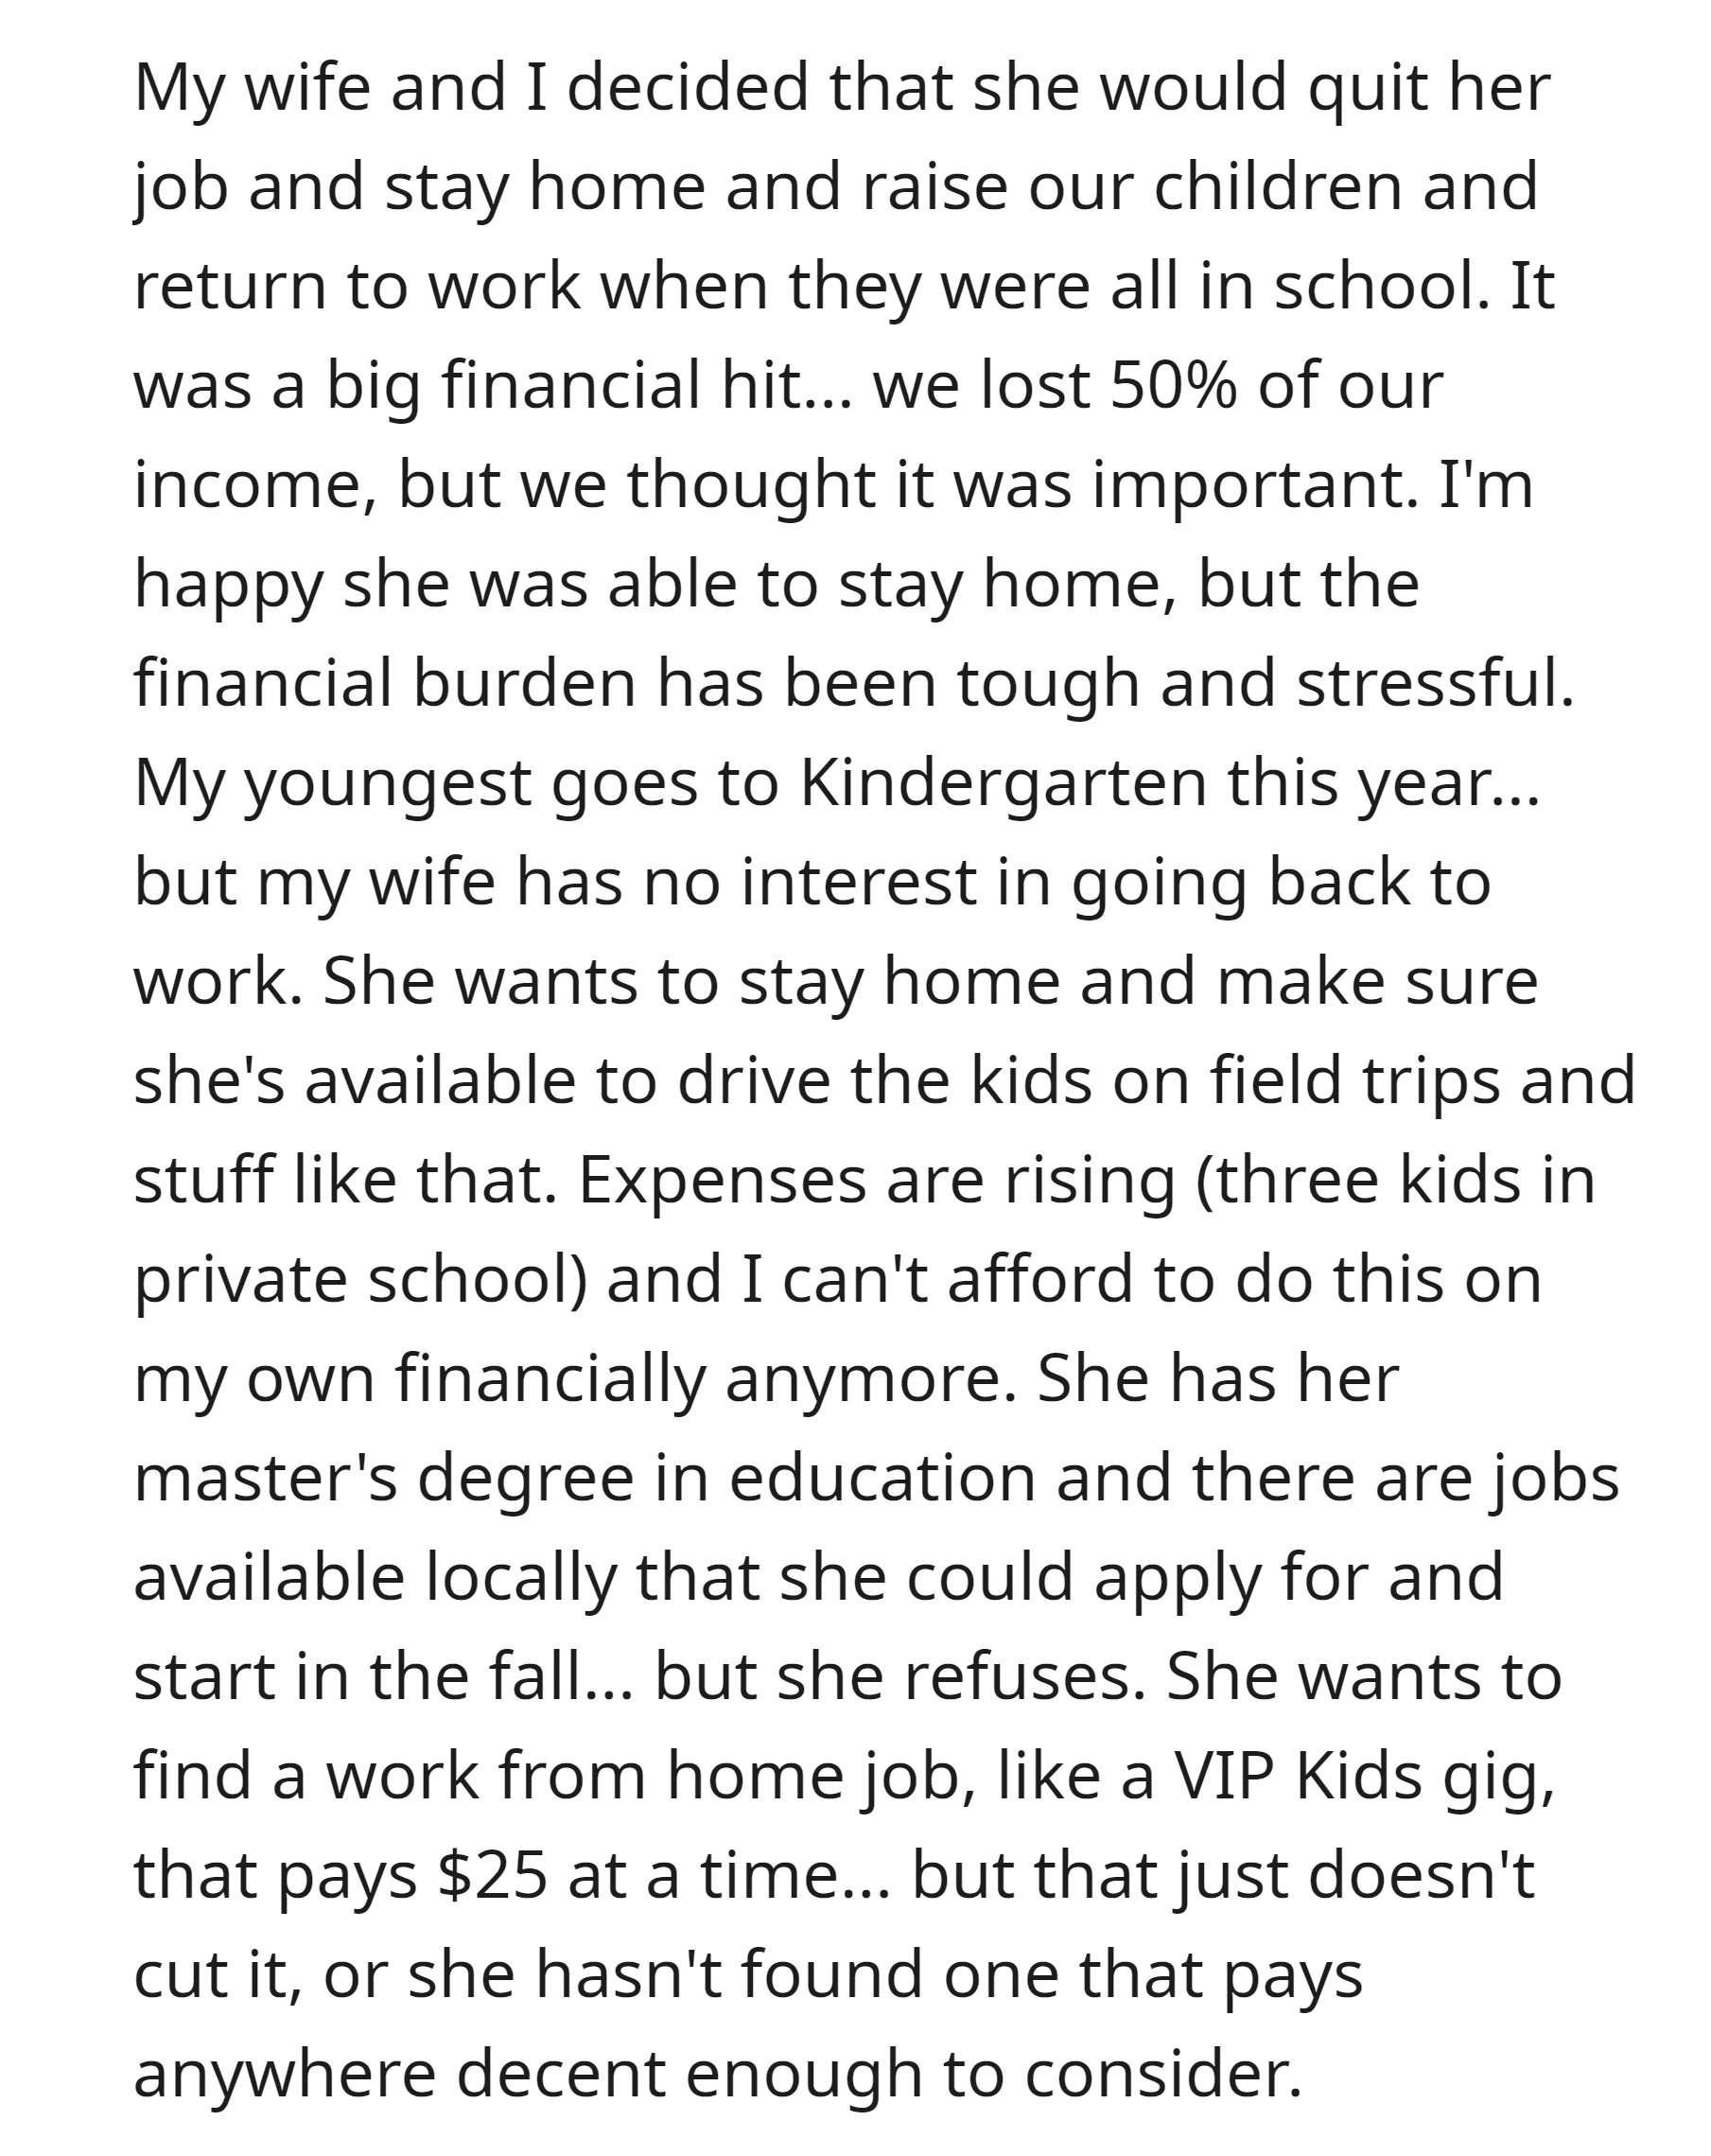 OP and his wife decided for her to stay home and raise their children, causing a 50% income loss